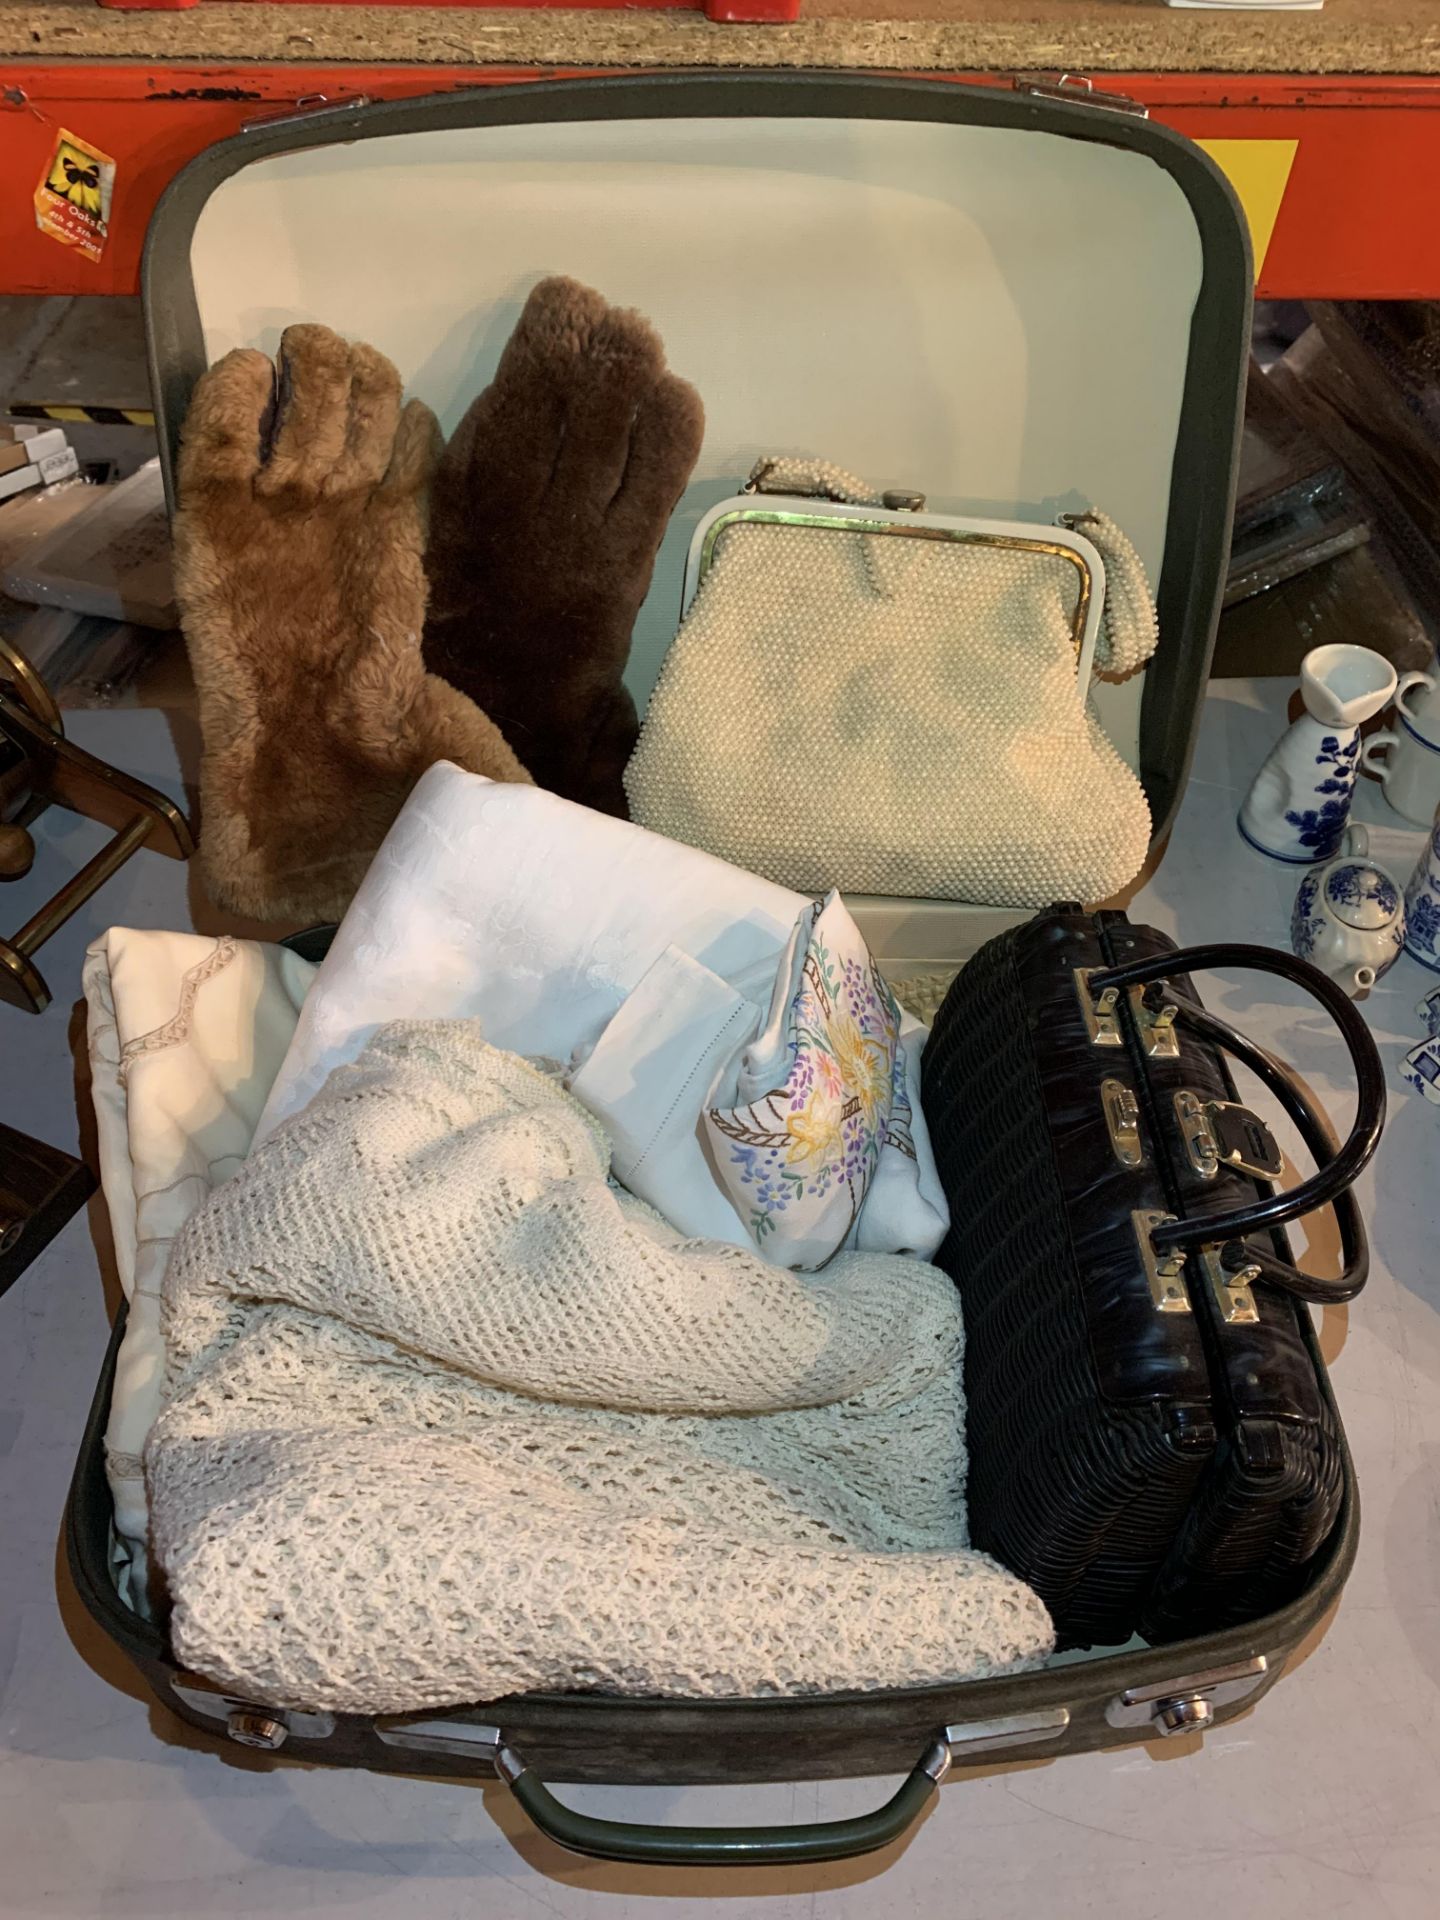 A VINTAGE SUITCASE CONTAINING LINEN, FUR MITTENS AND TWO VINTAGE HAND BAGS, ONE MADE IN BRITISH HONG